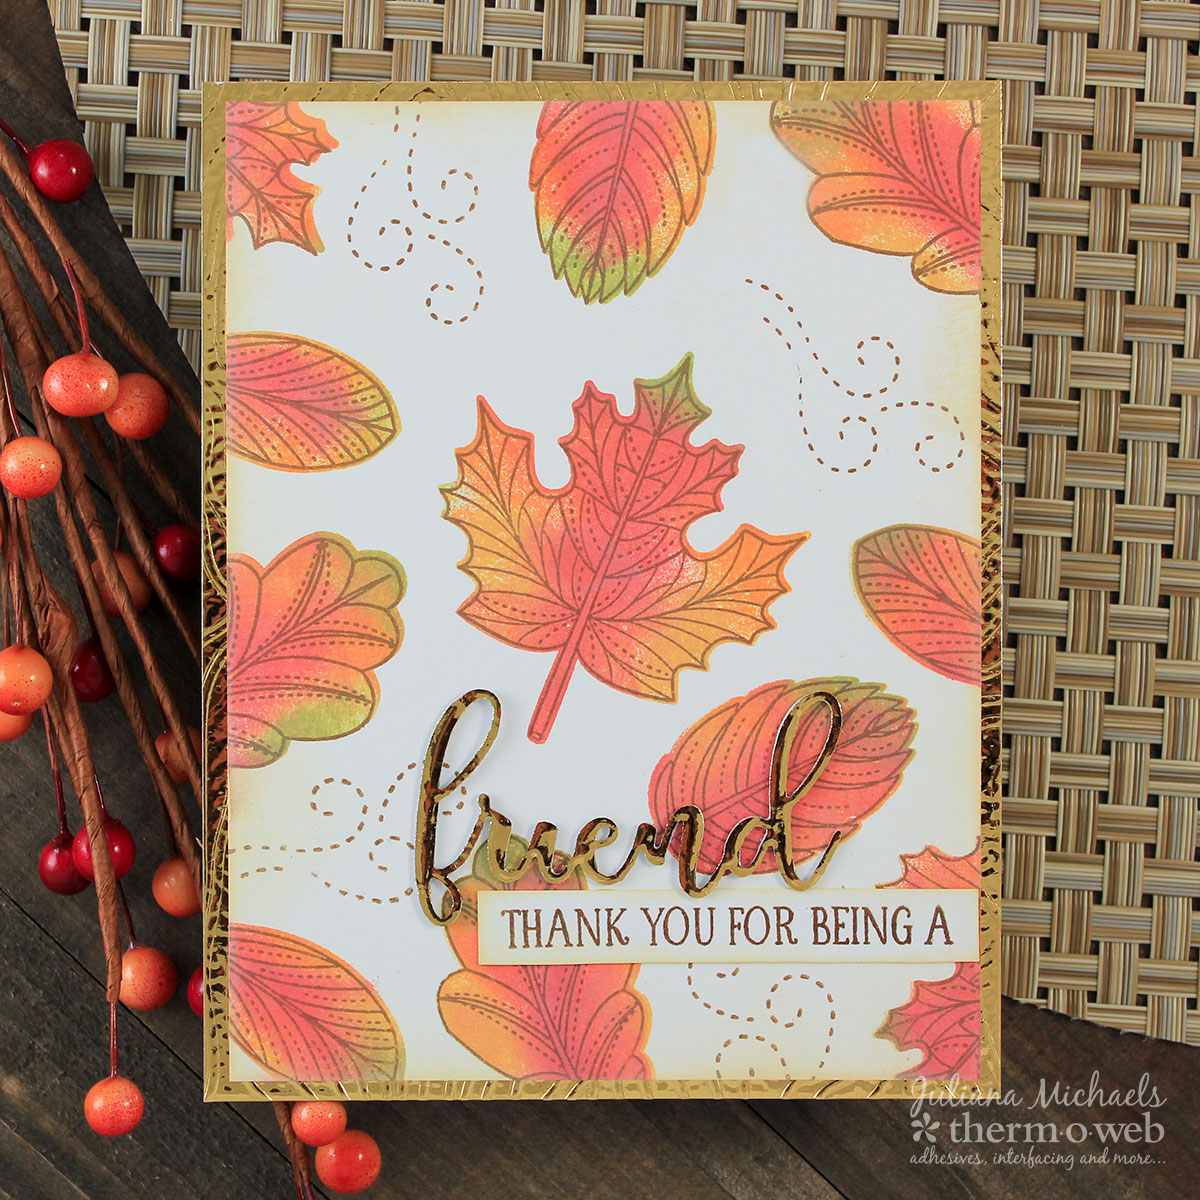 Fall Friendship Card by Juliana Michaels featuring Therm O Web DecoFoiled Die Cuts